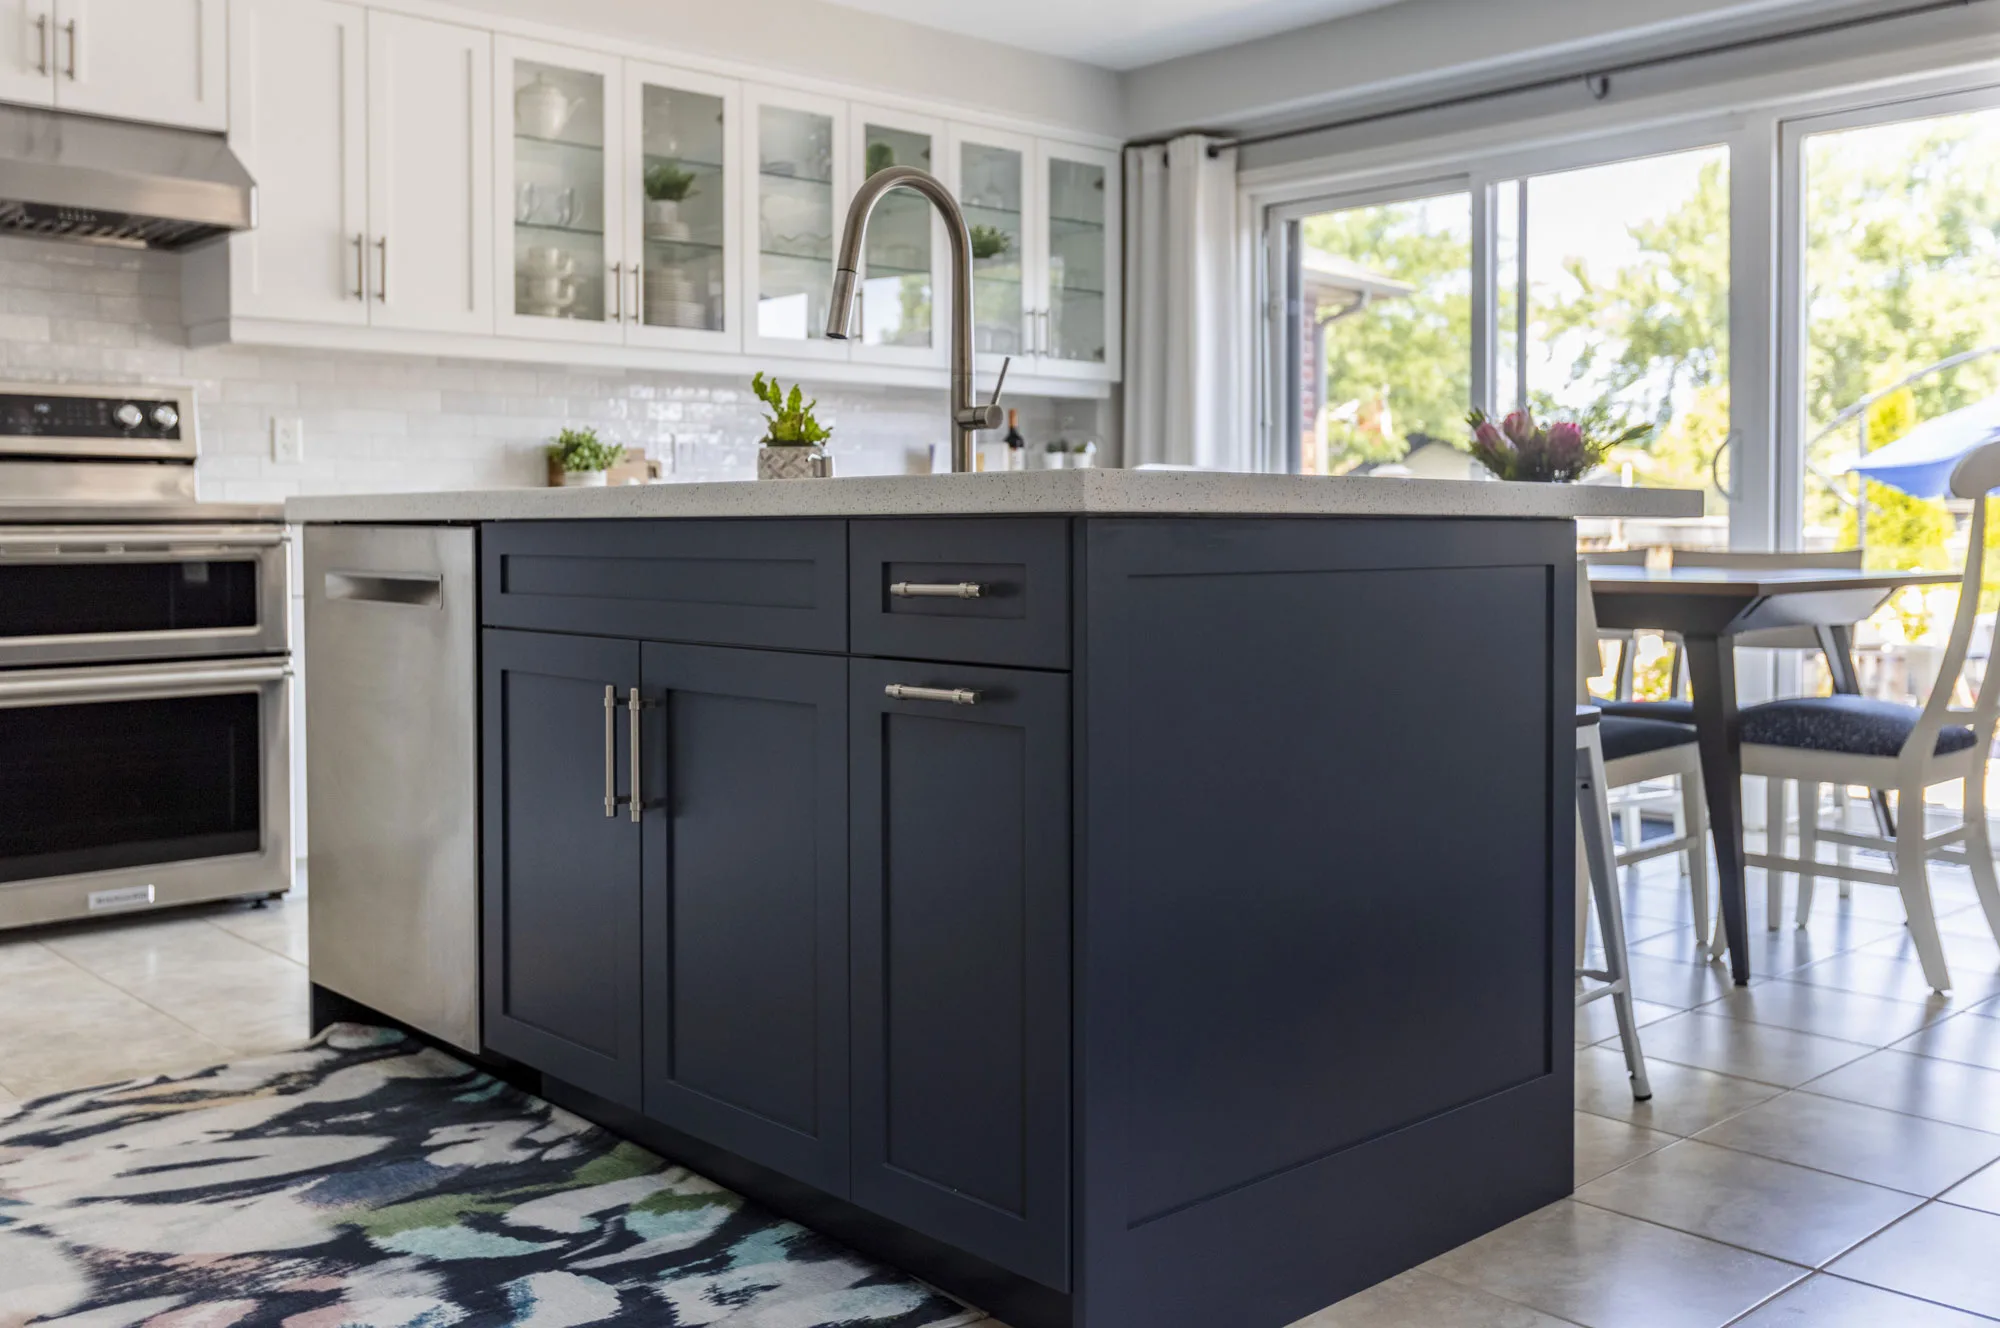 A dark blue kitchen island with silver handles and a stainless steel dishwaher